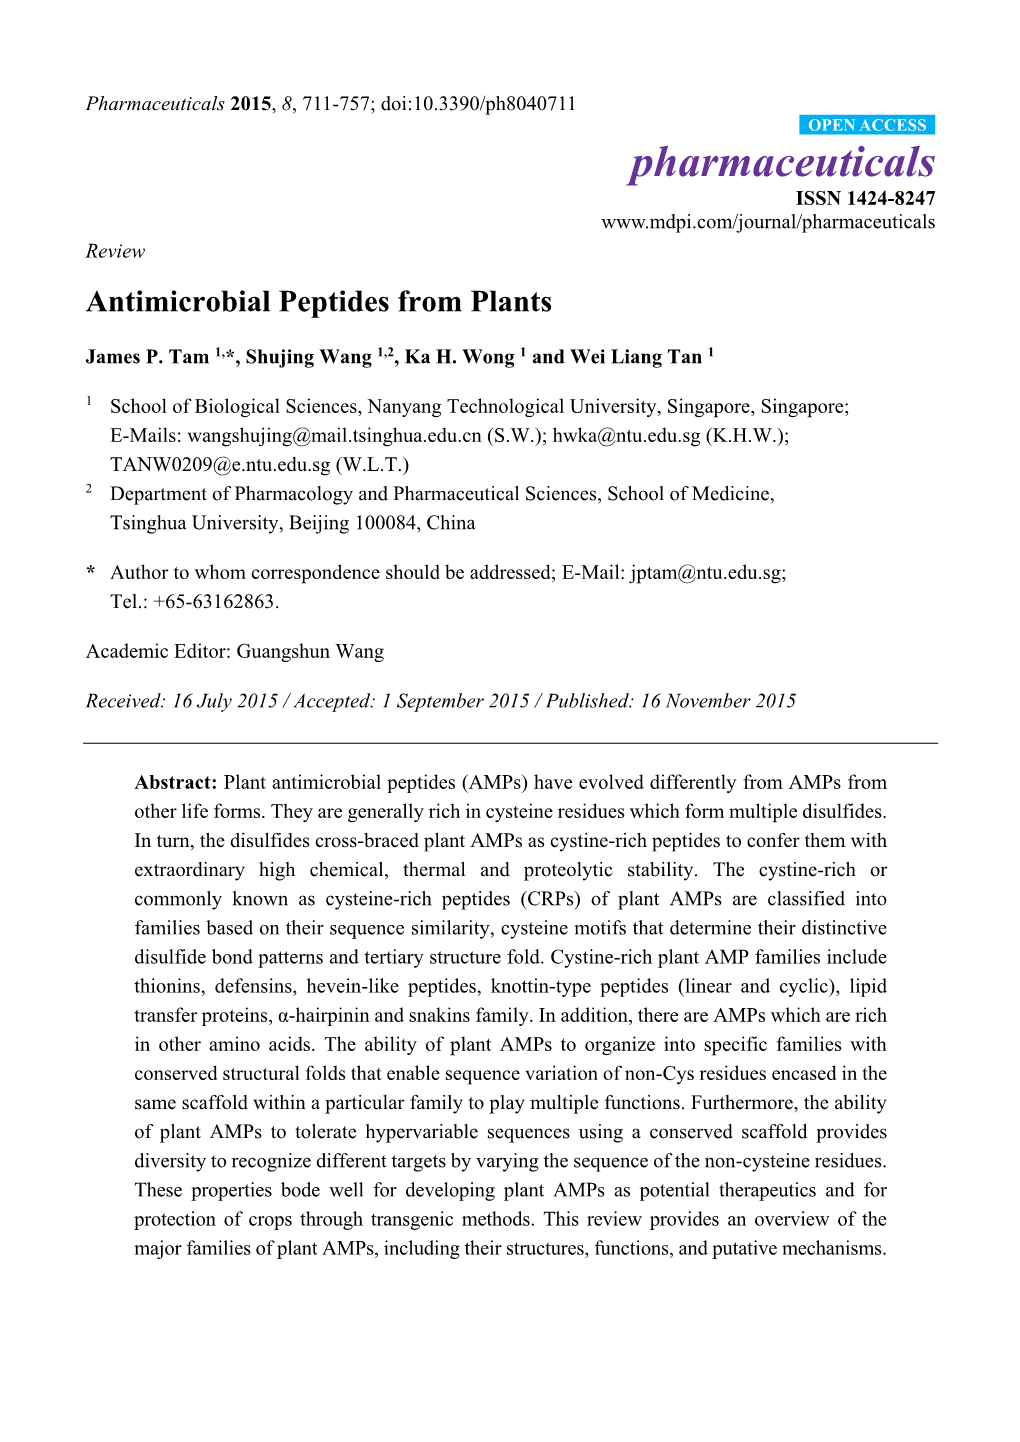 Antimicrobial Peptides from Plants